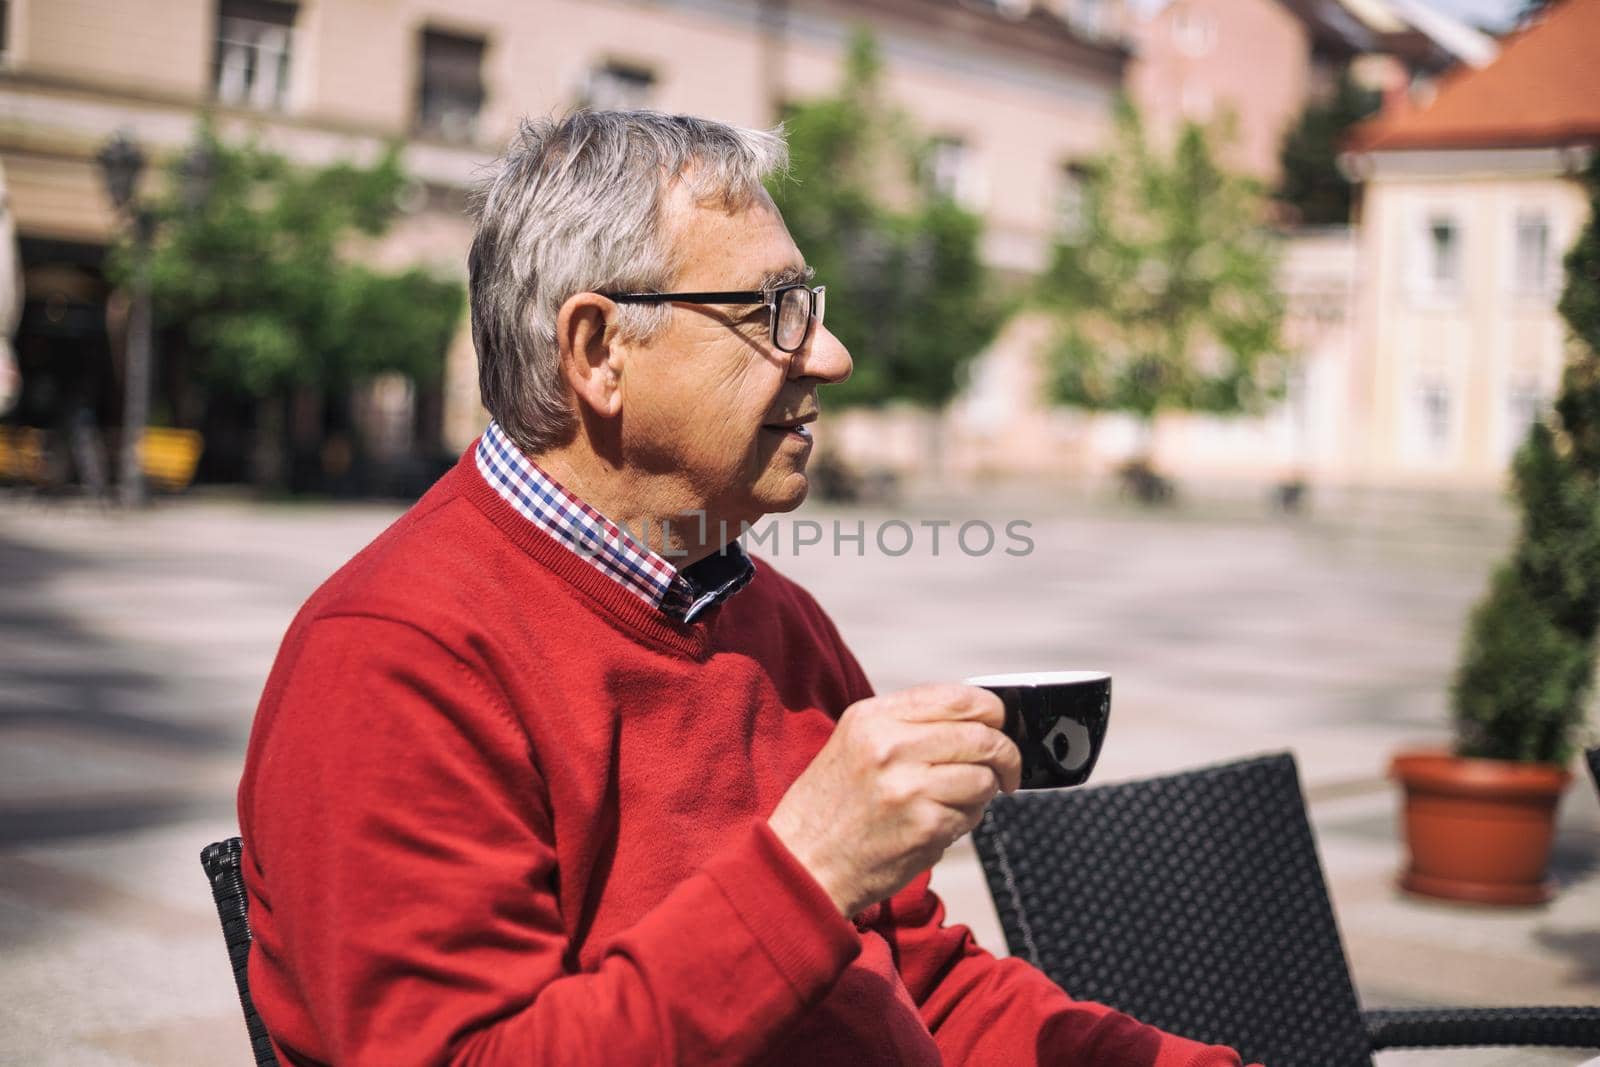 Cheerful senior man enjoys drinking coffee at the bar.Image is intentionally toned.